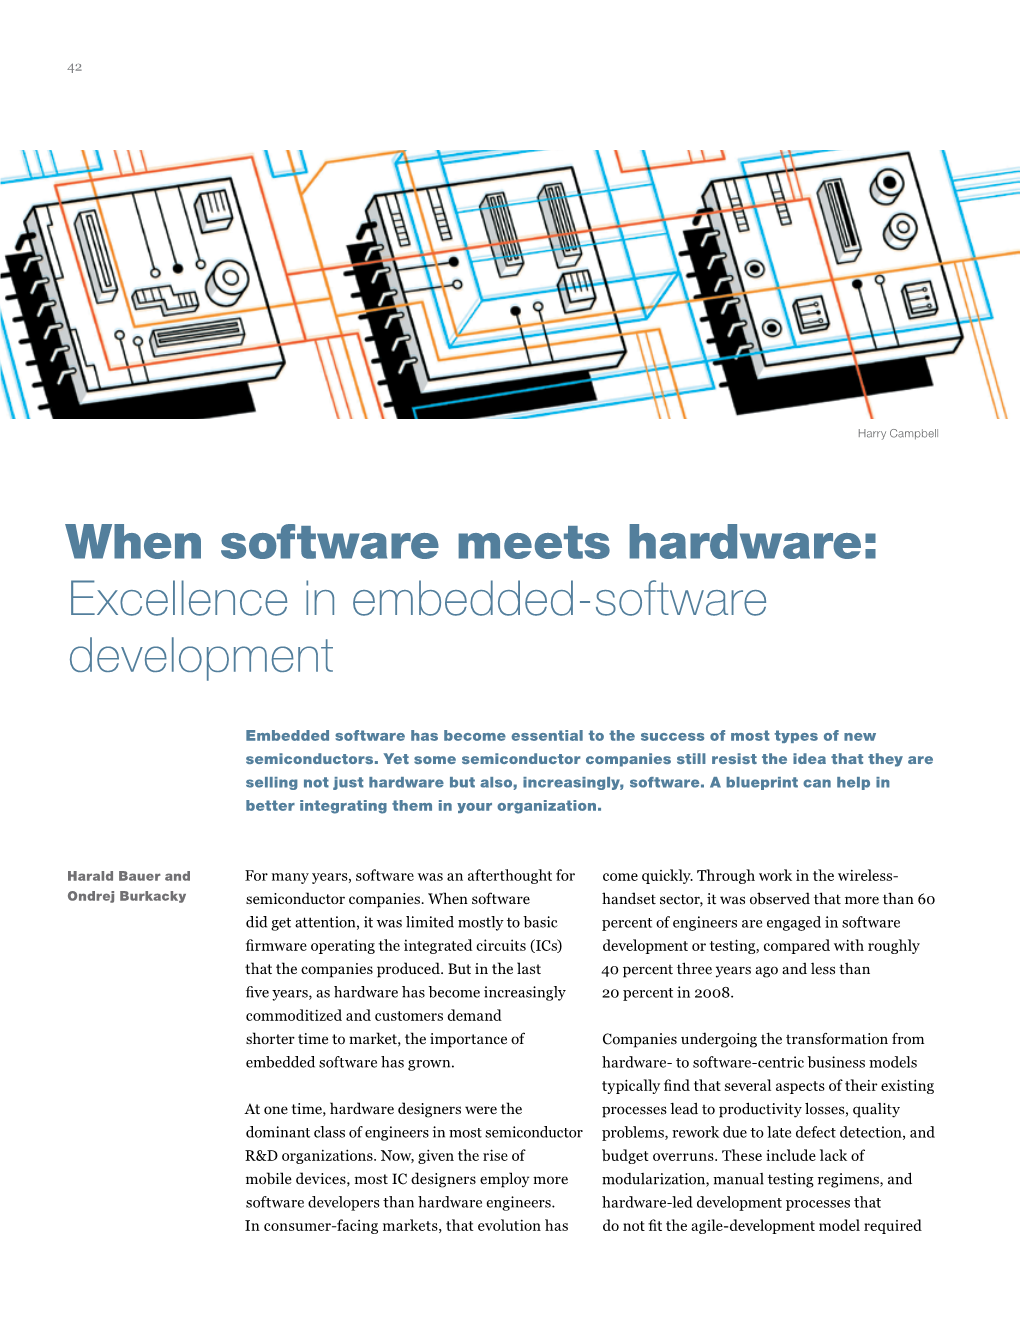 Excellence in Embedded-Software Development